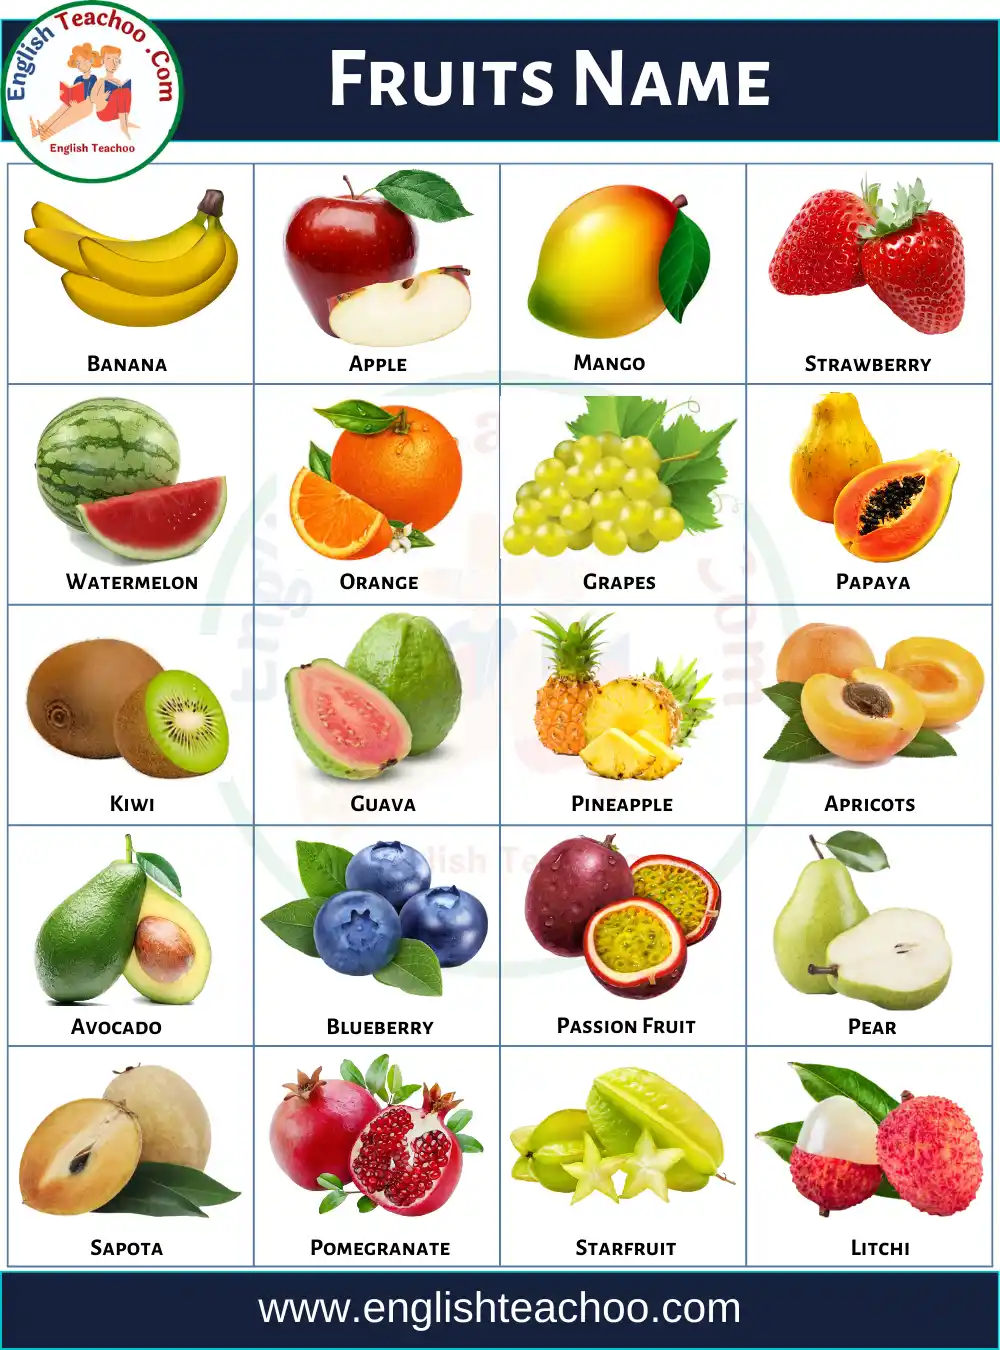 50 Fruits Name In English With Pictures - EnglishTeachoo